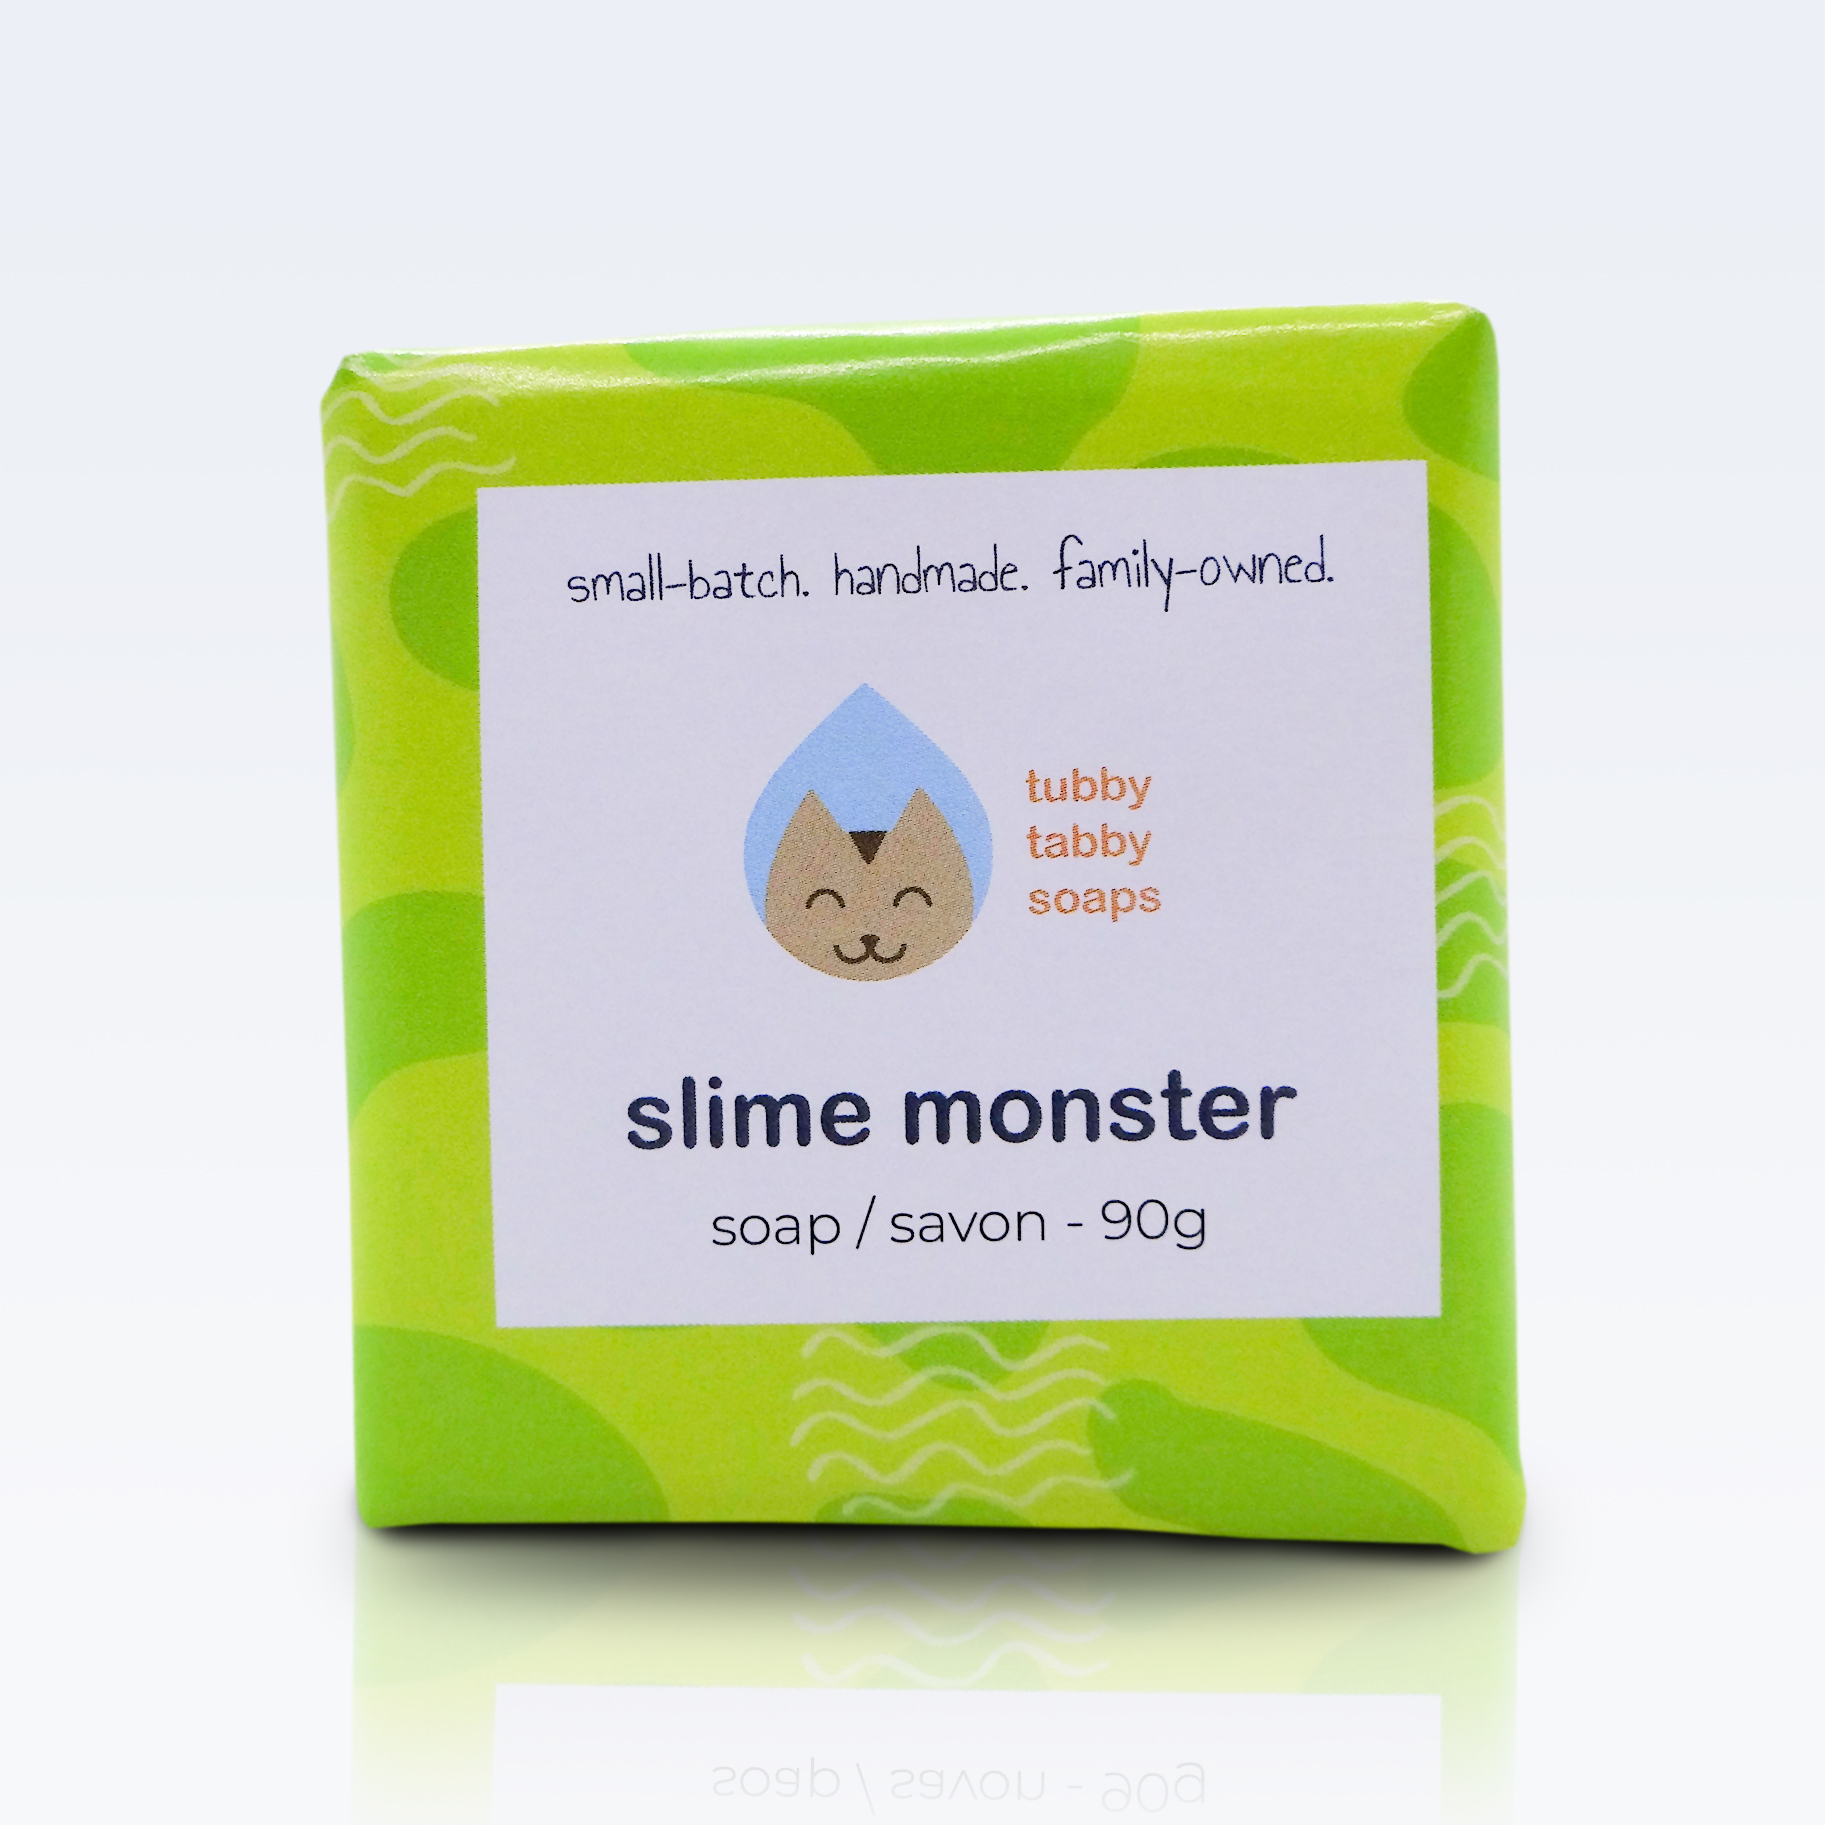 Slime Monster handmade kids soap by Tubby Tabby Soaps (monkey farts fragrance, swirled soap with googly eyes on top)